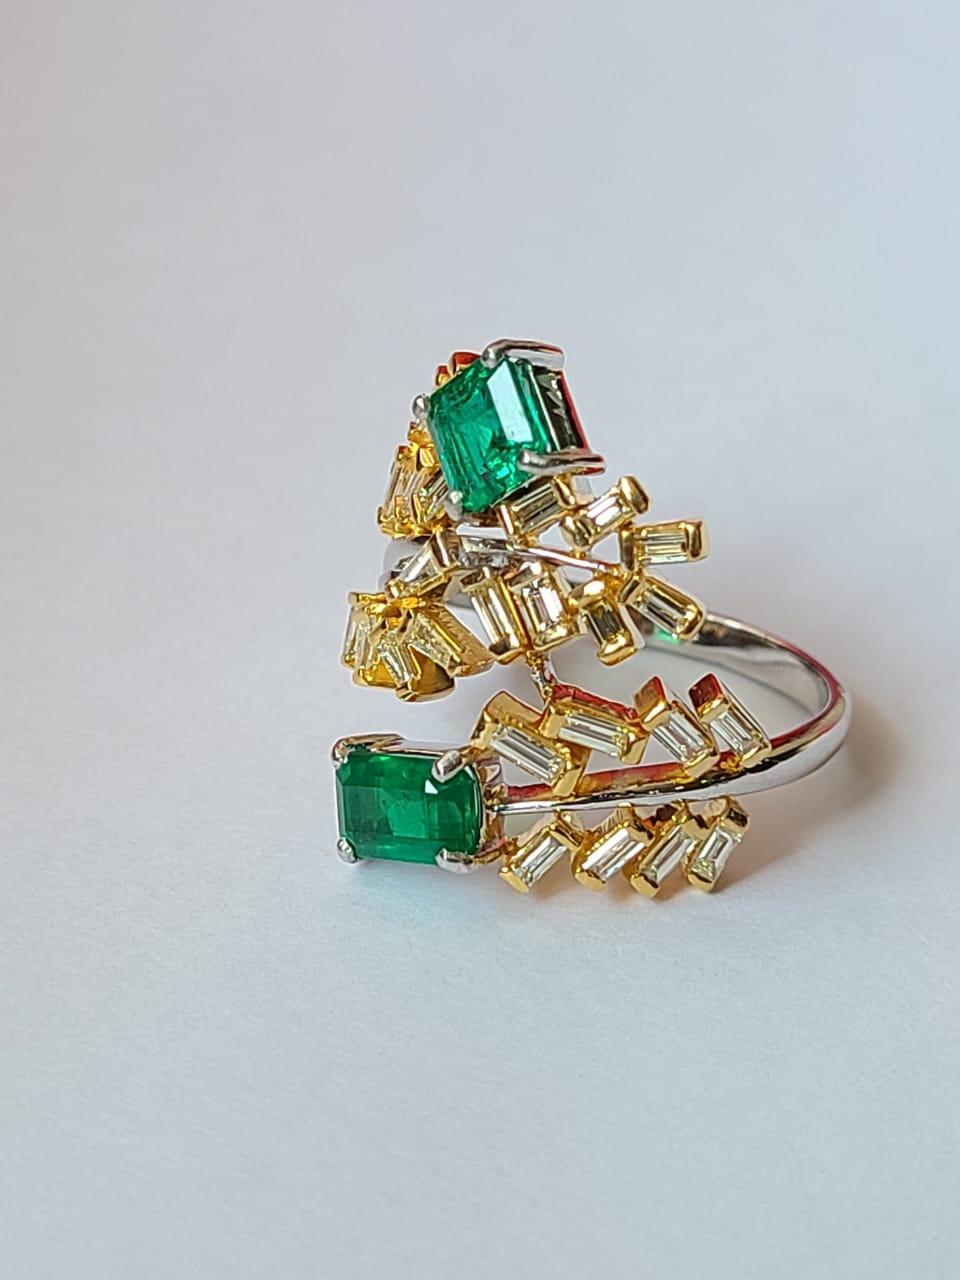 A very gorgeous and one of a kind, Emerald &b Yellow Diamonds Cocktail Ring set in 18K Gold. The weight of the Emeralds is 1.27 carats. The Emeralds are of Zambian origin and are completely natural, without any treatment. The weight of the Diamonds